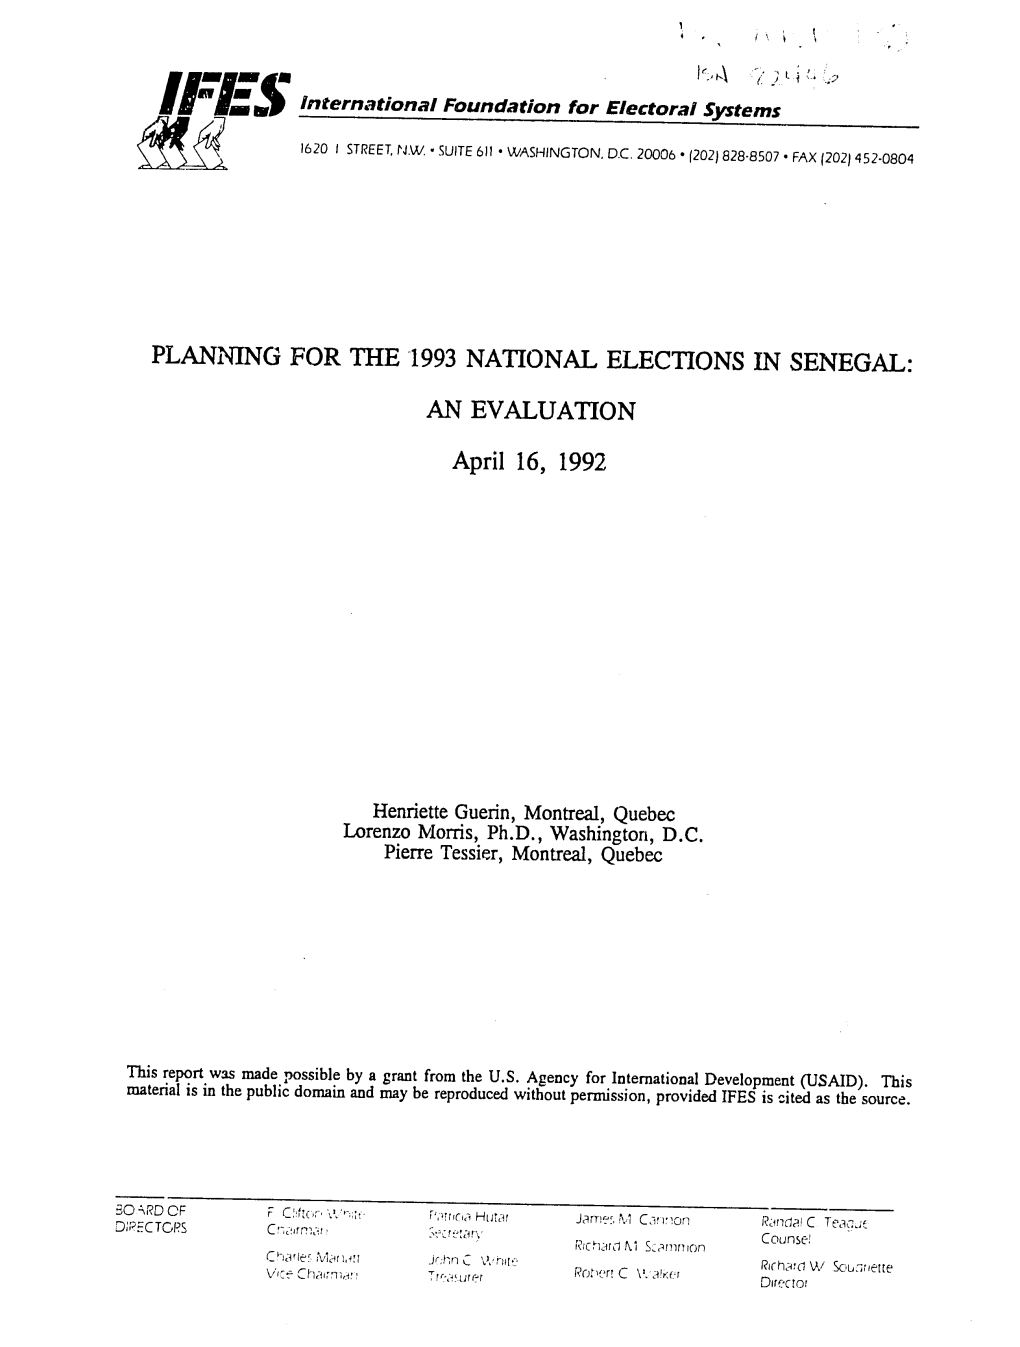 Planning for the 1993 National Elections in Senegal: an Evaluation